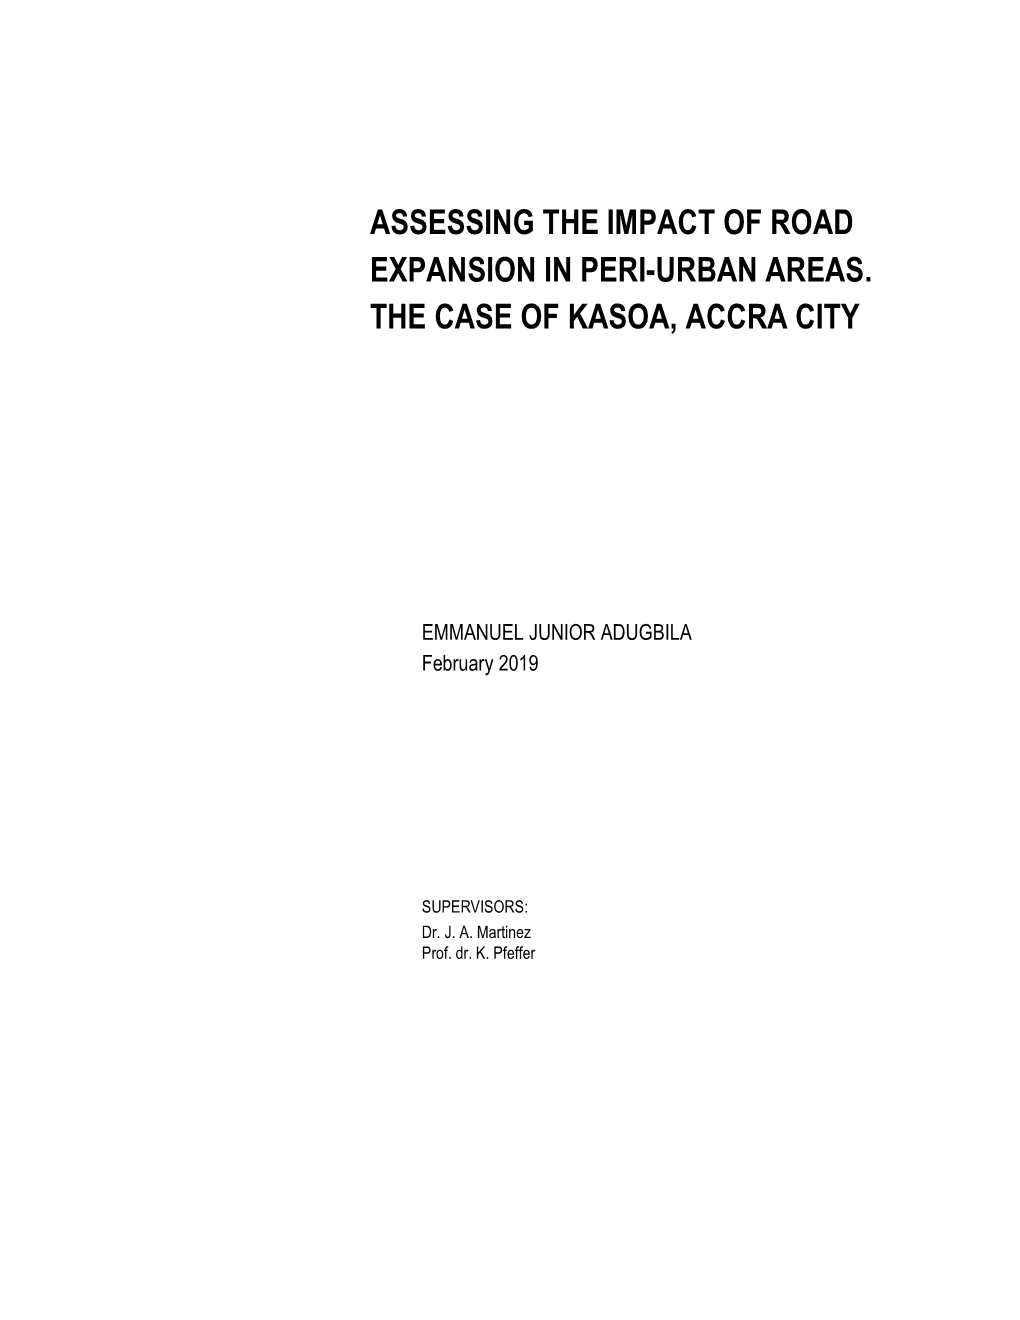 Assessing the Impact of Road Expansion in Peri-Urban Areas. the Case of Kasoa, Accra City